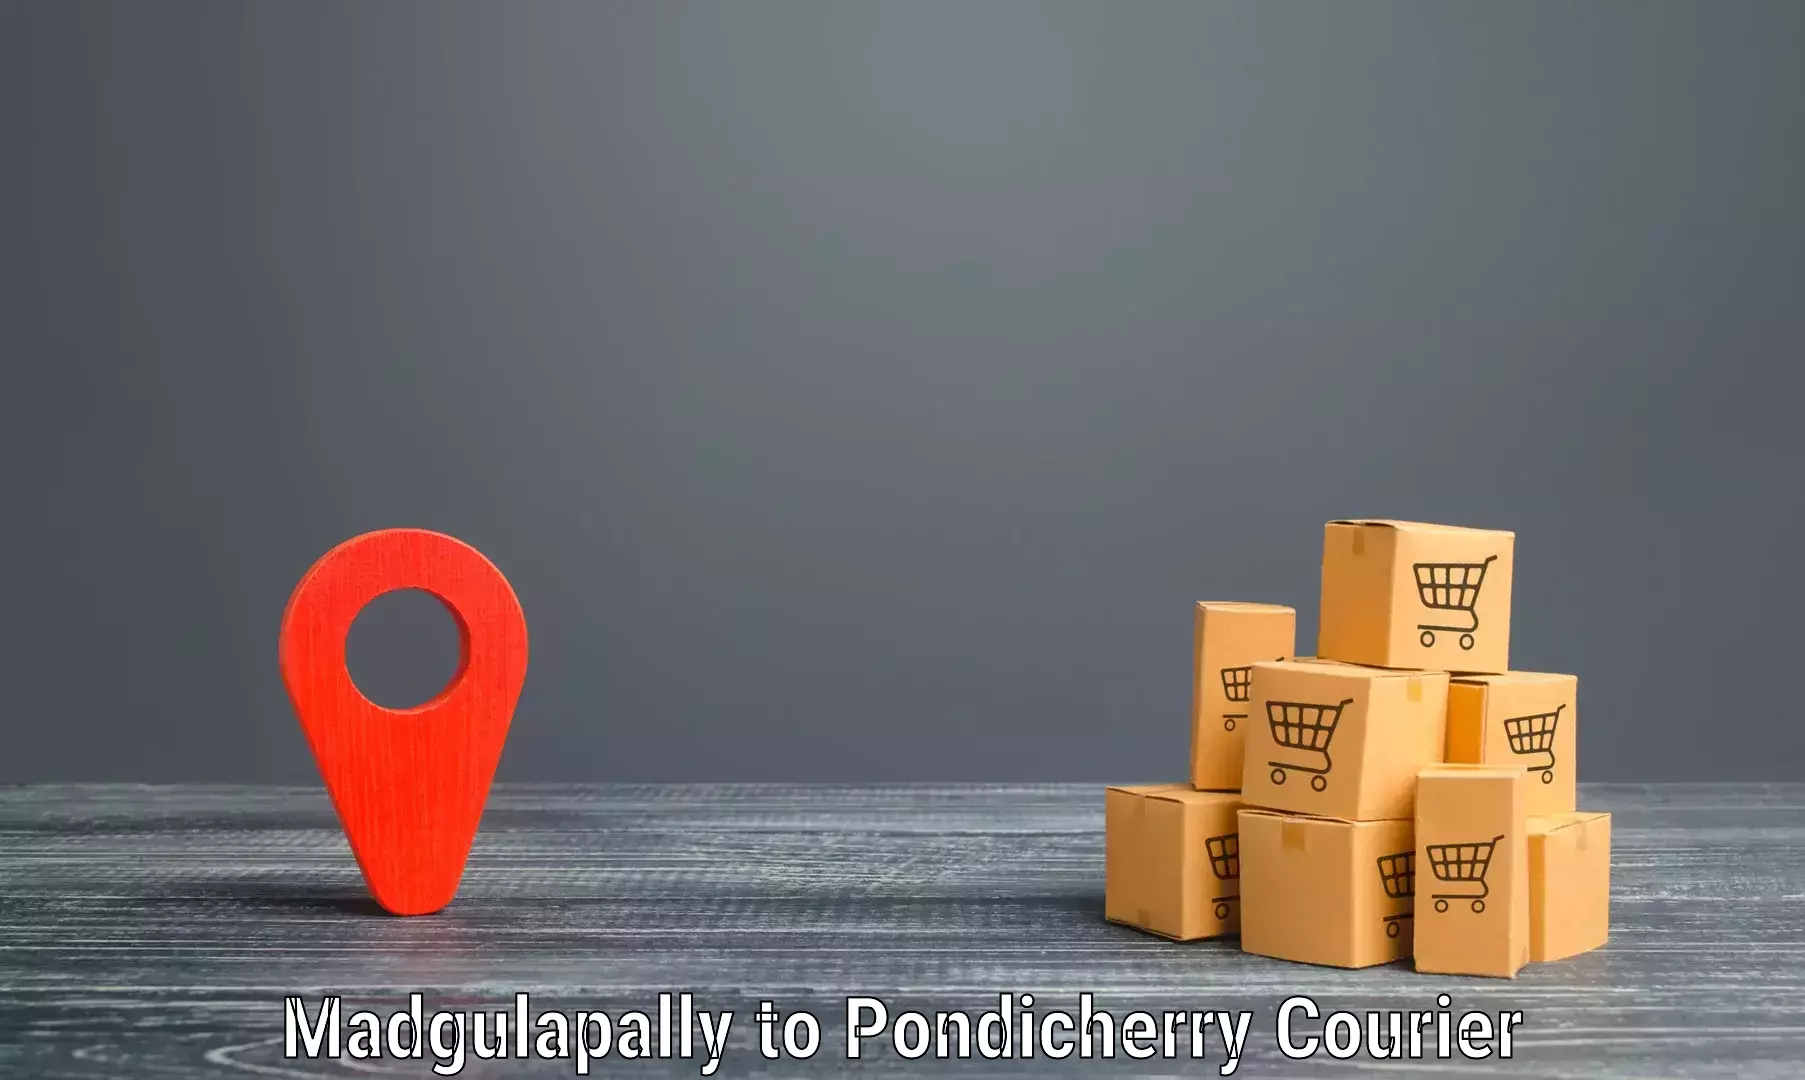 Business delivery service Madgulapally to Pondicherry